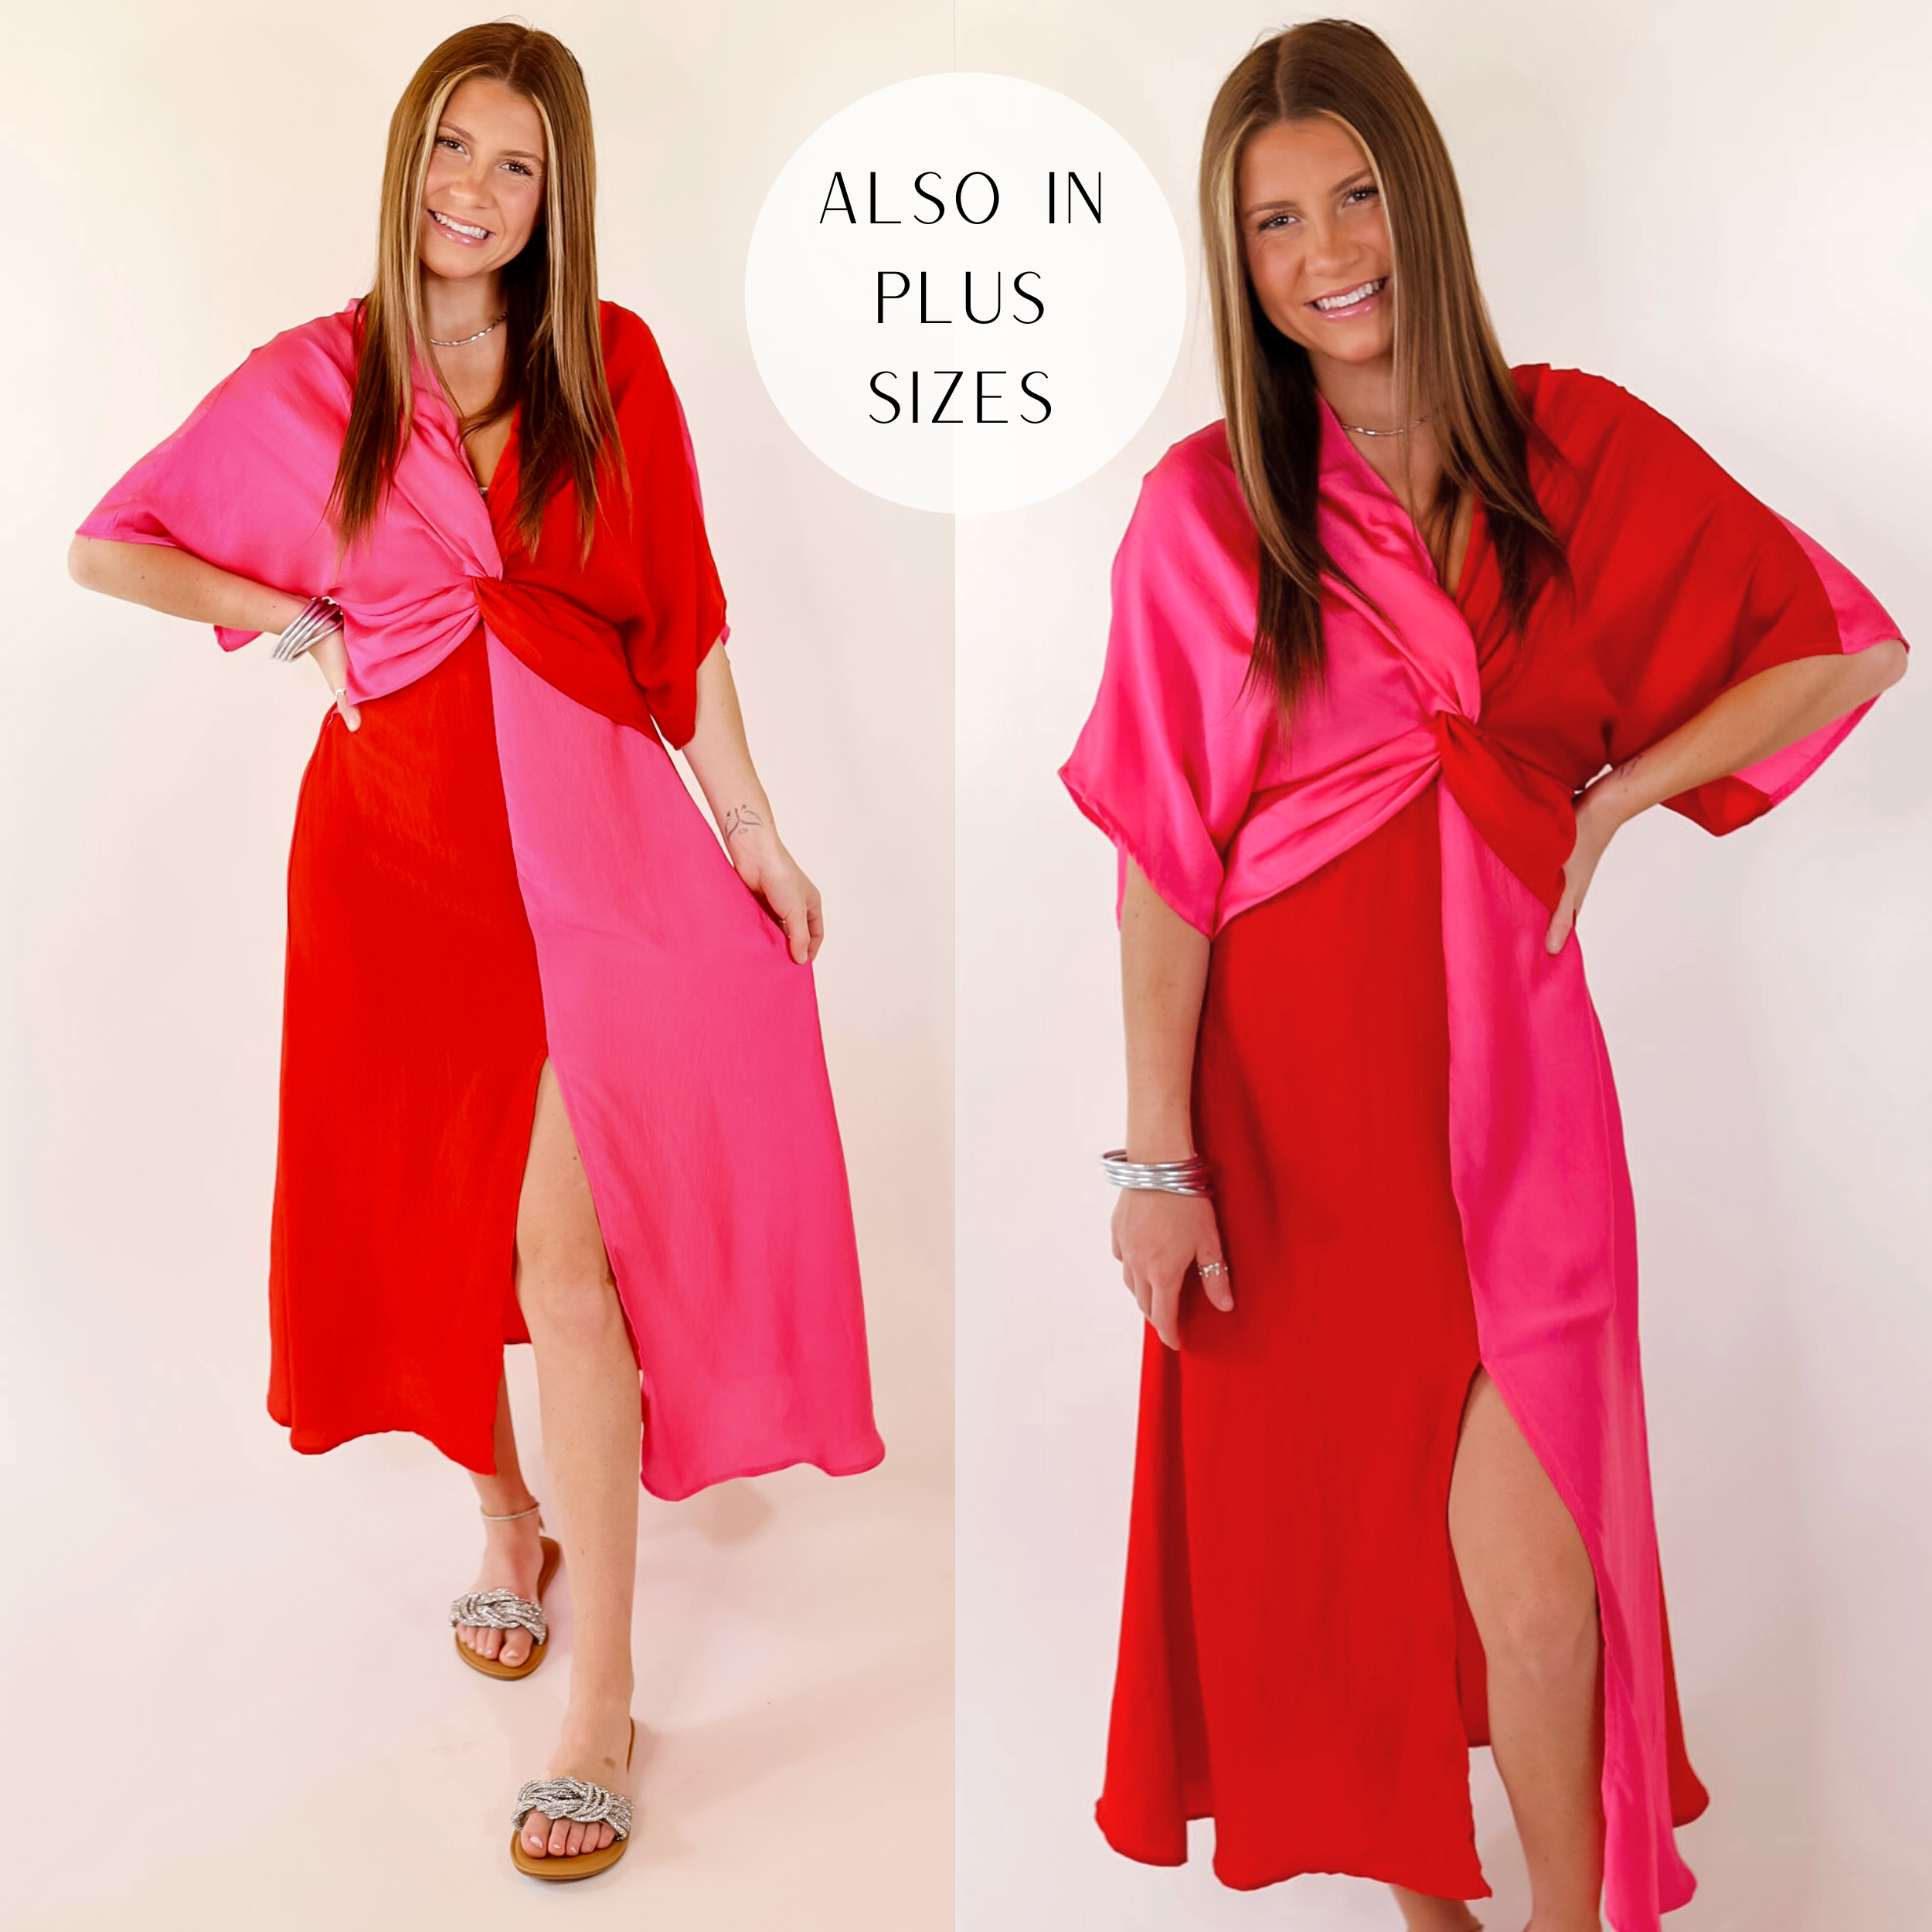 Model has a color block midi dress with a front knot in red and pink.